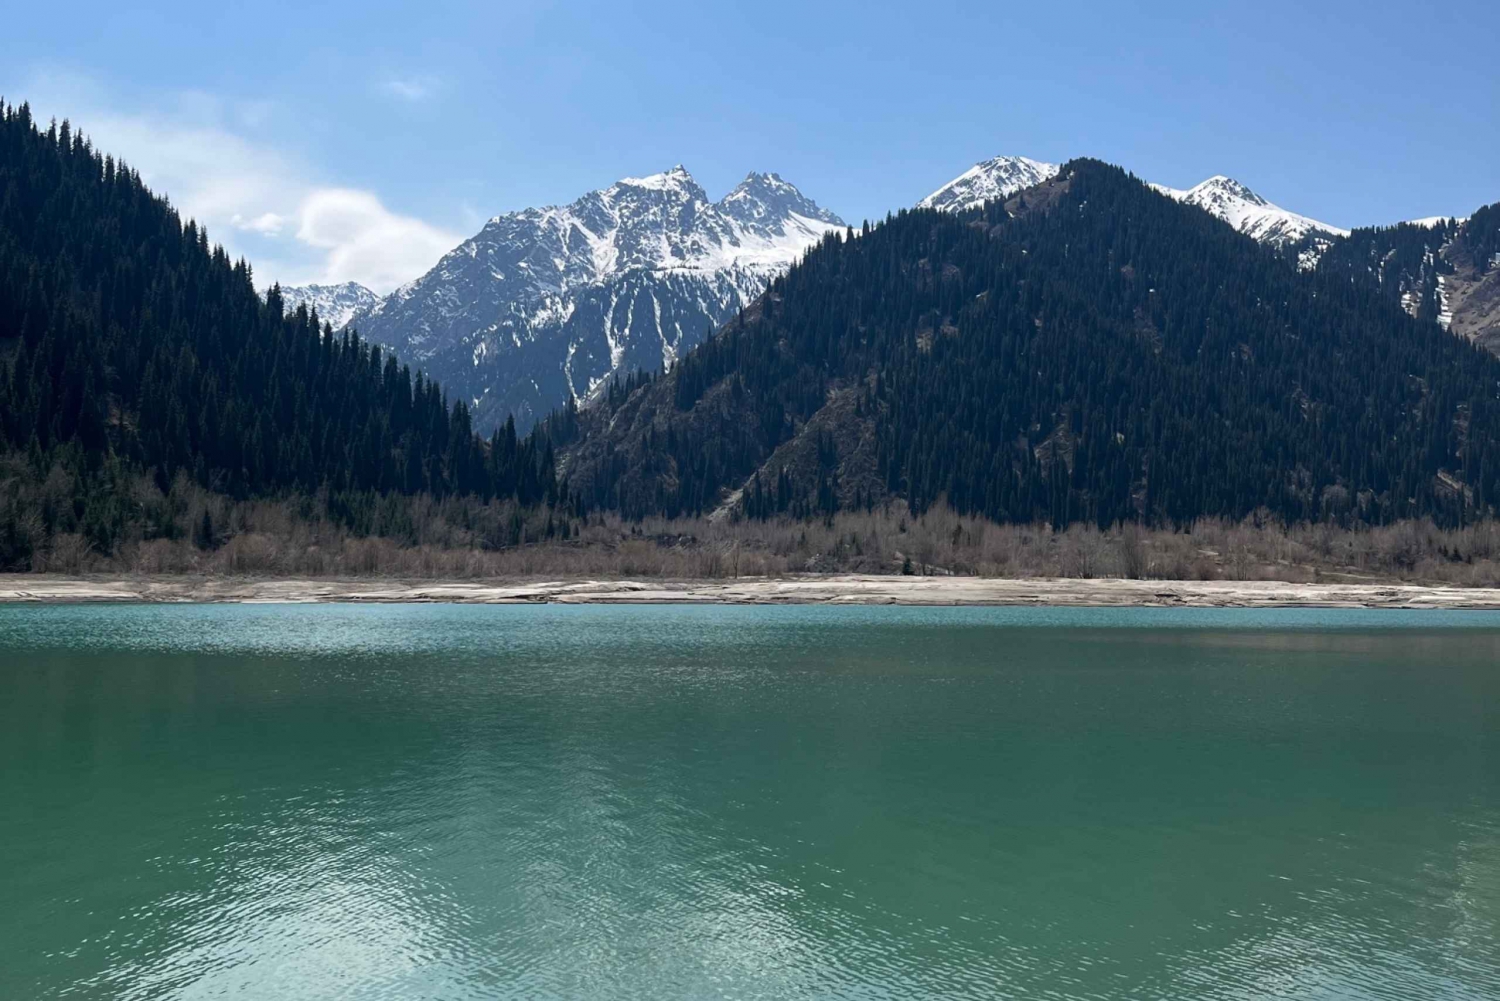 From Almaty: Issyk Lake and Bear Waterfall - Transfer